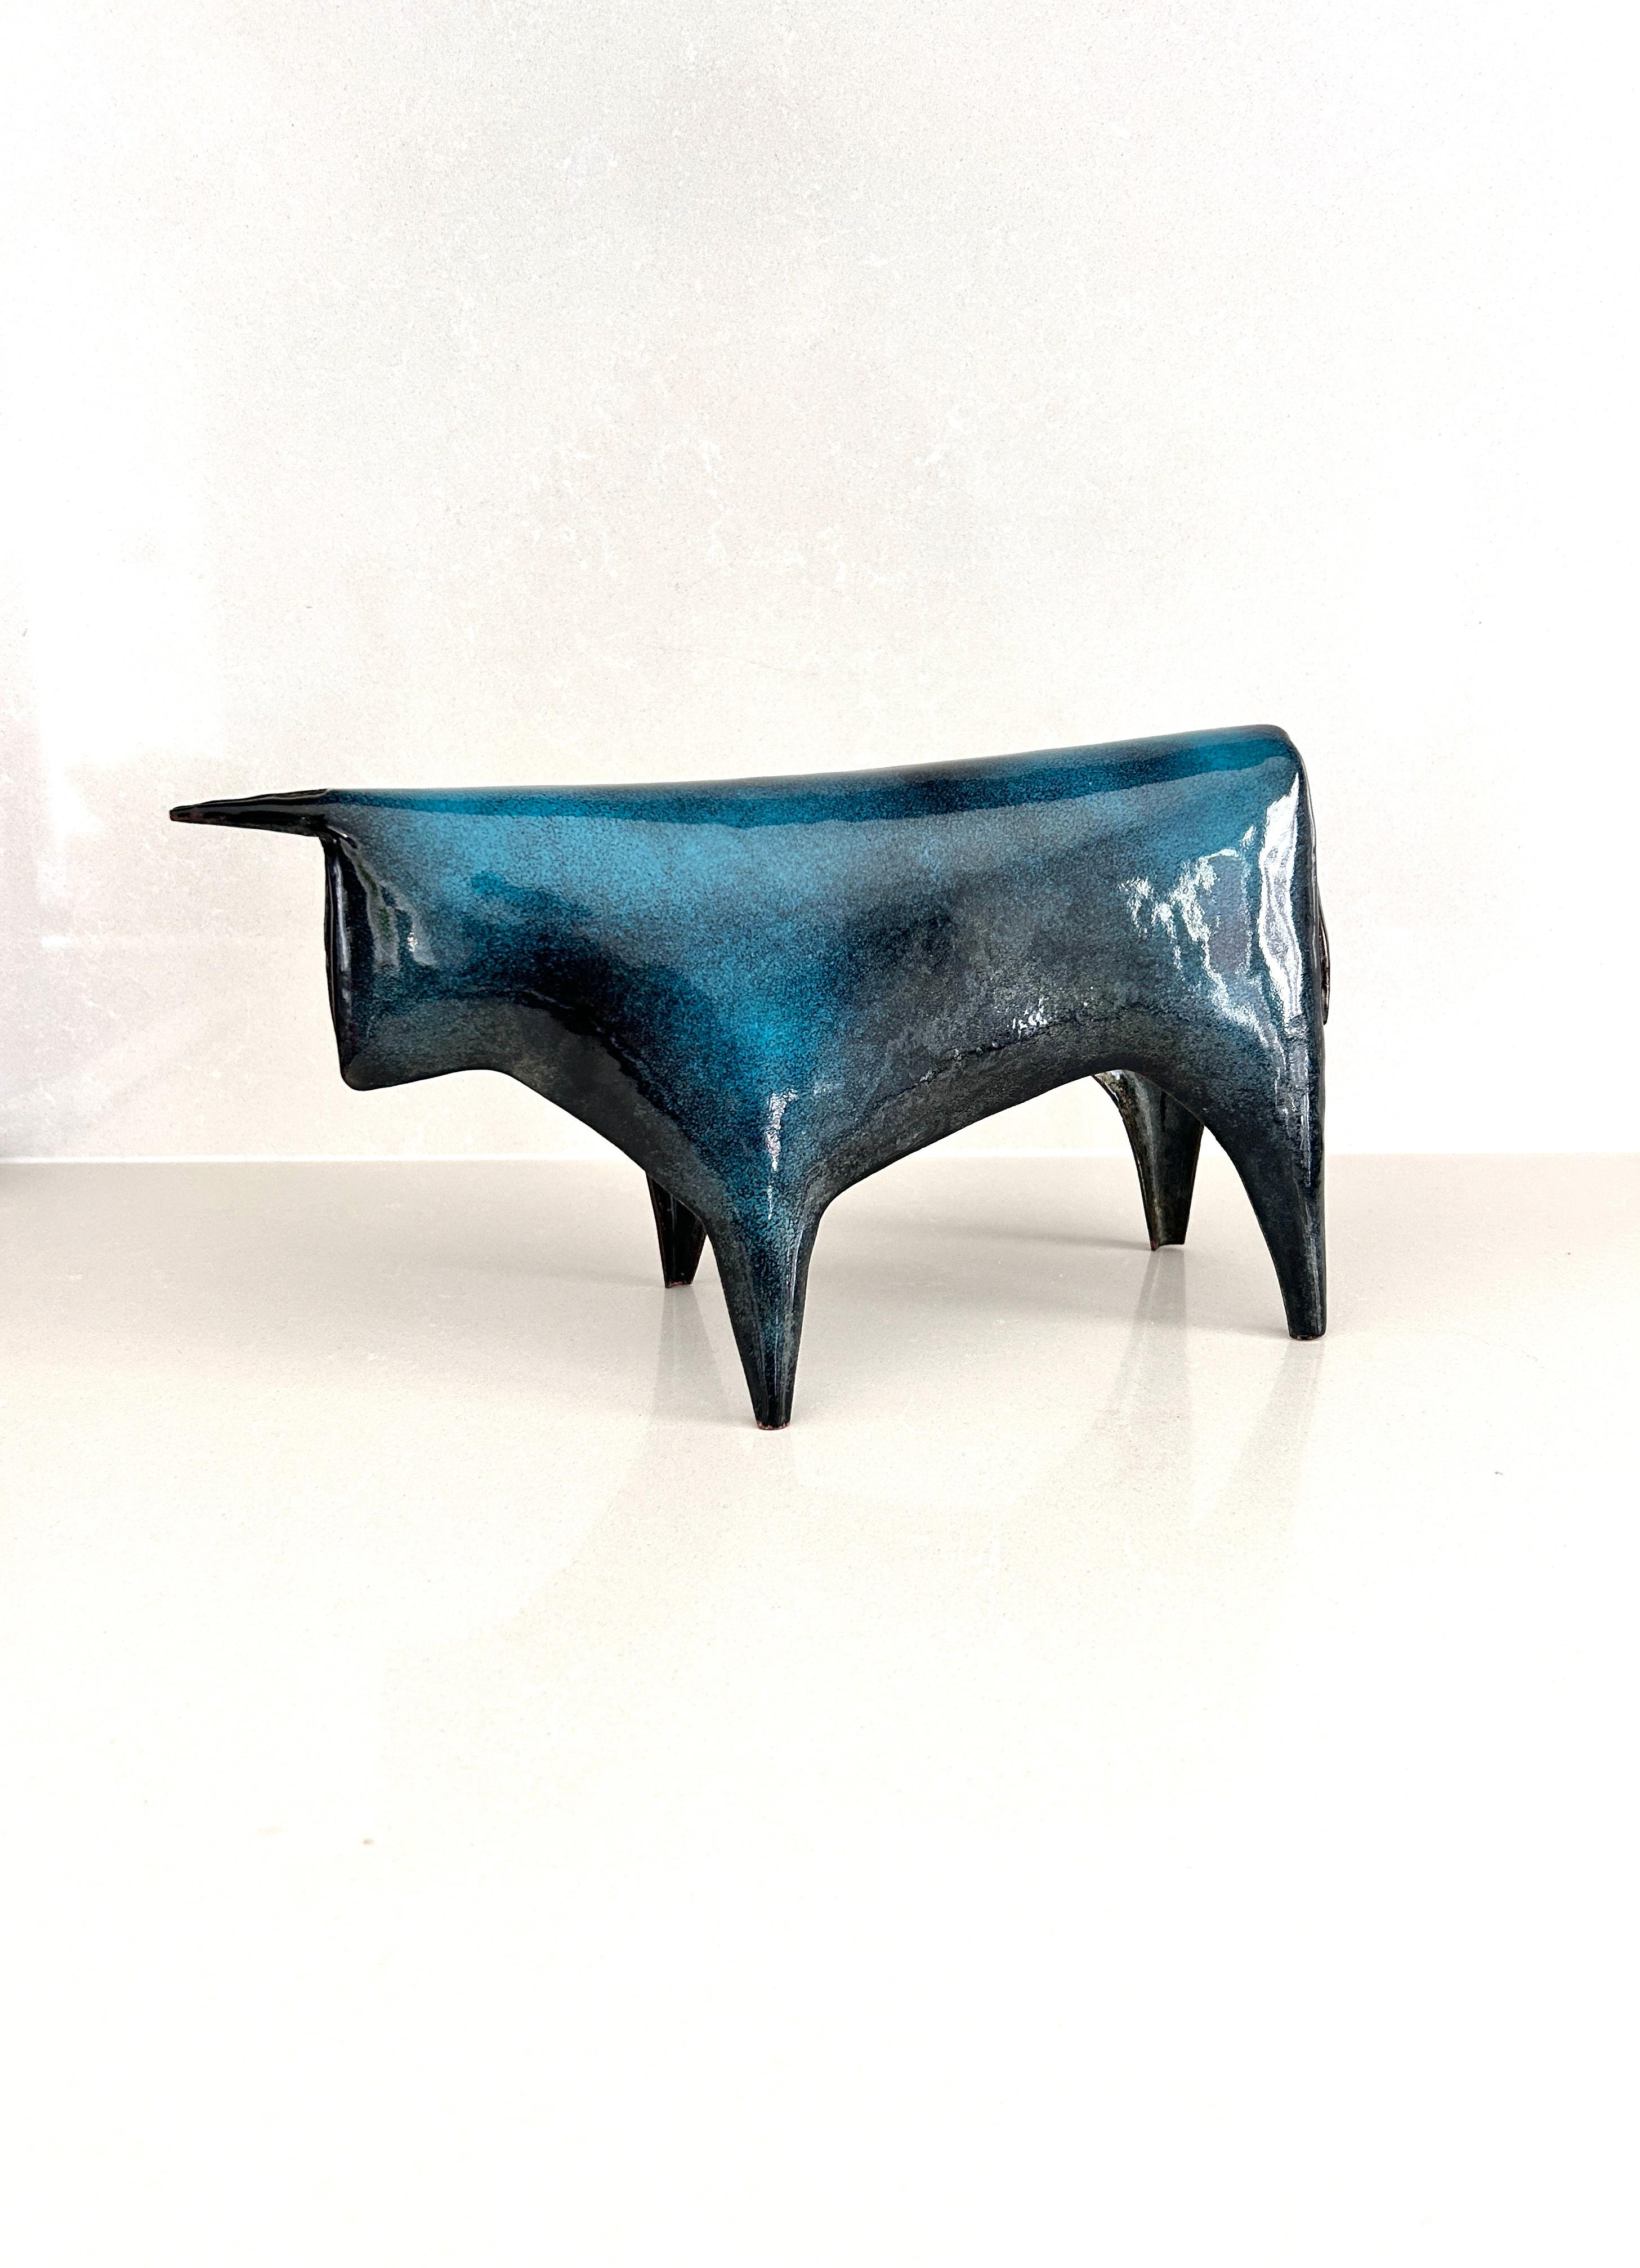 Copper Very rare Taurus-shaped sculpture by Gio Ponti for De Poli, 1950s For Sale